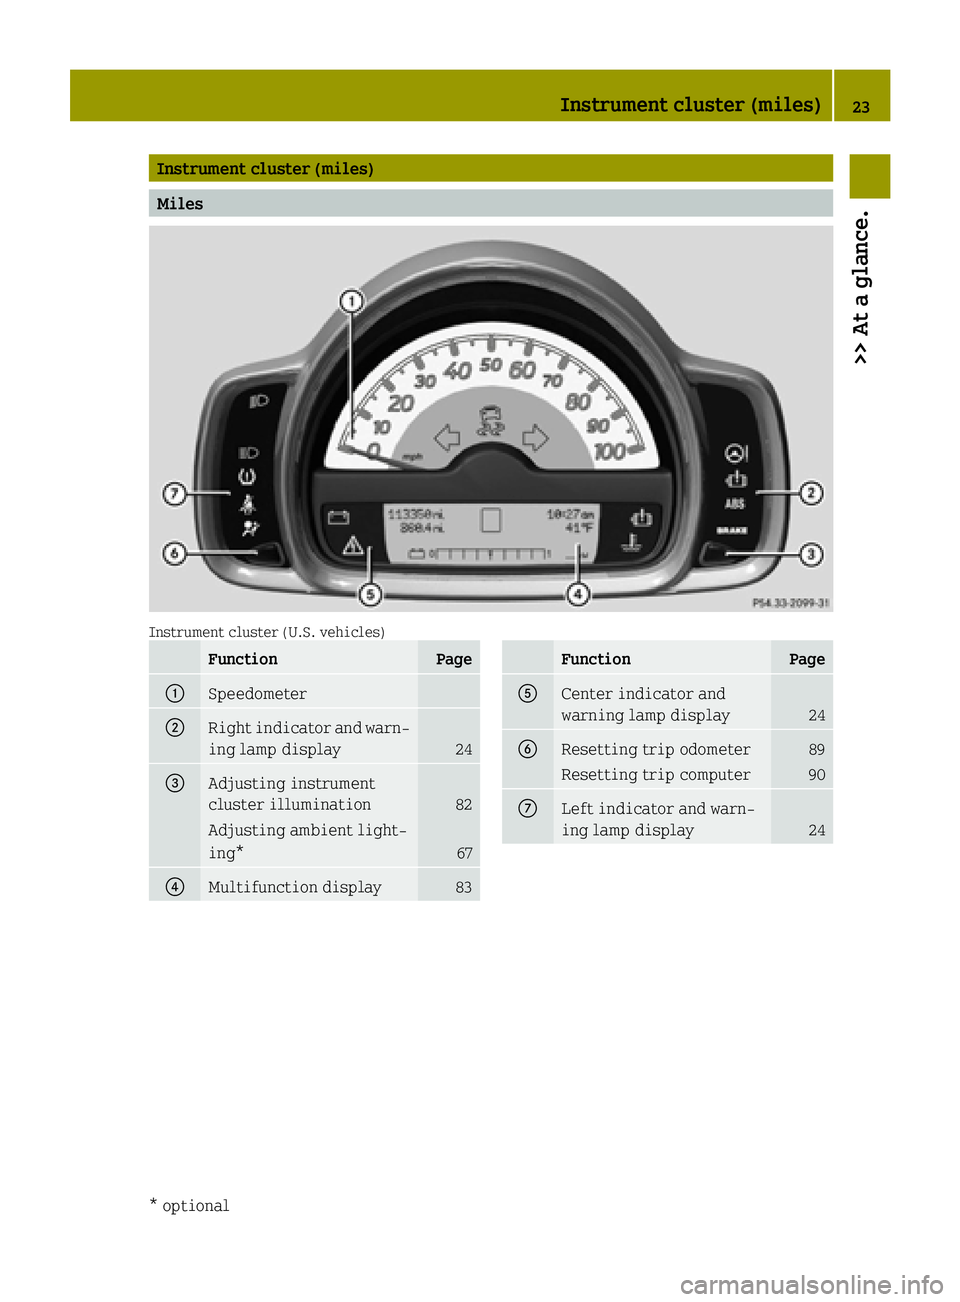 SMART FORTWO COUPE 2015  Owners Manual Instrument cluster (miles)
Miles
Instrument cluster (U.S. vehicles)
Function Page
:
Speedometer
;
Right indicator and warn-
ing lamp display 24
=
Adjusting instrument
cluster illumination
82
Adjusting